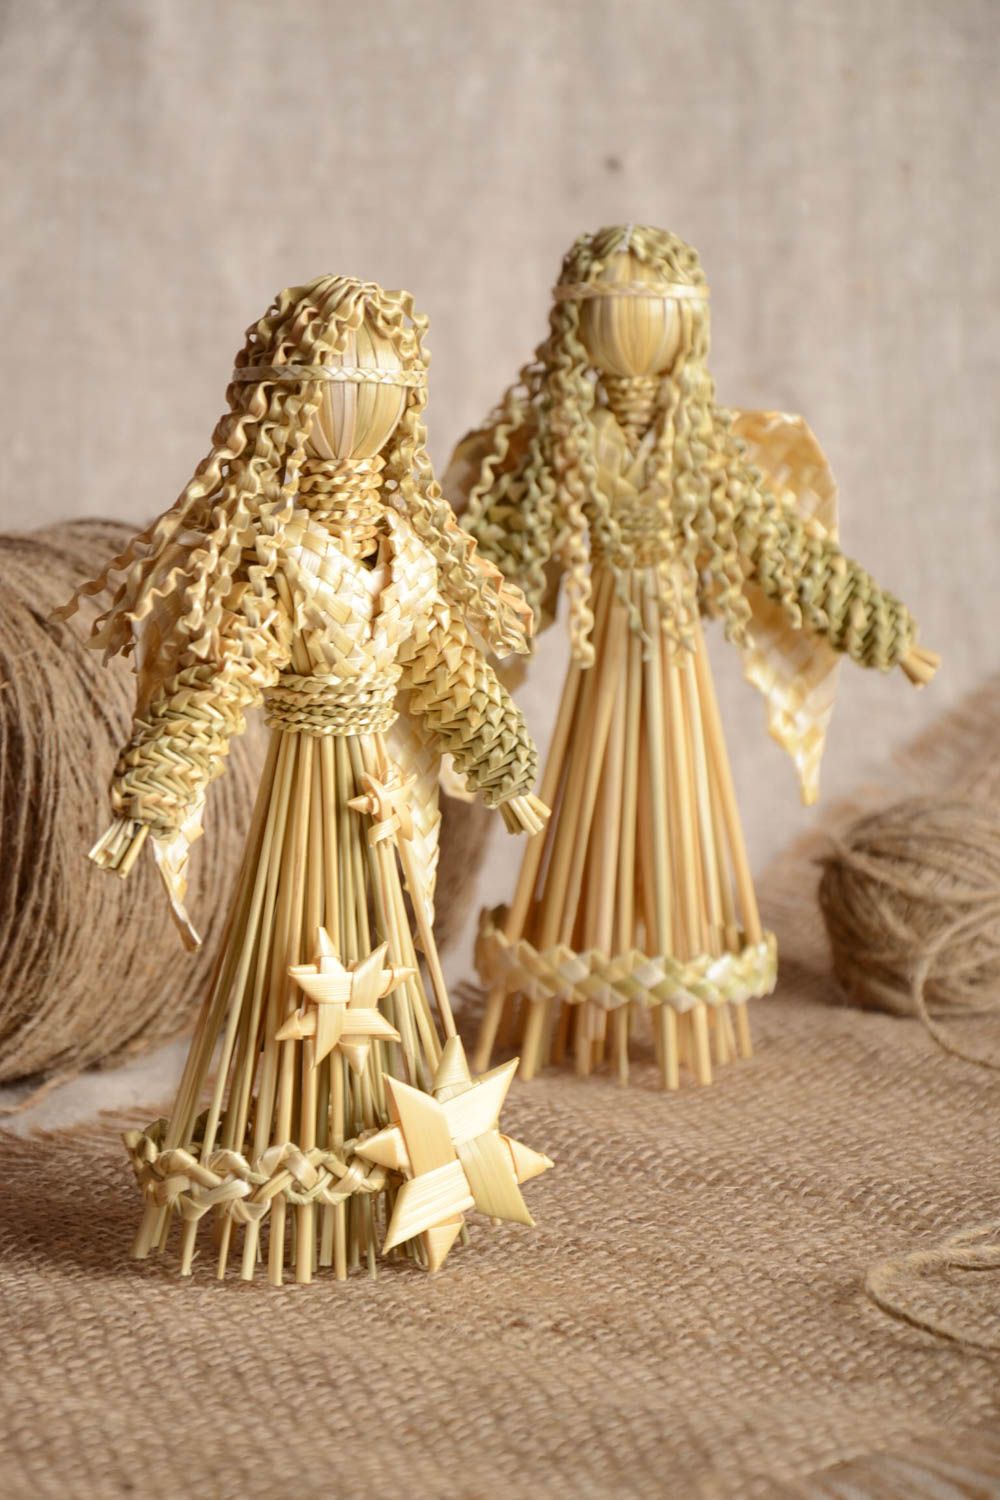 Set of toys made of natural straw unusual beautiful angels home decor 2 pieces photo 1